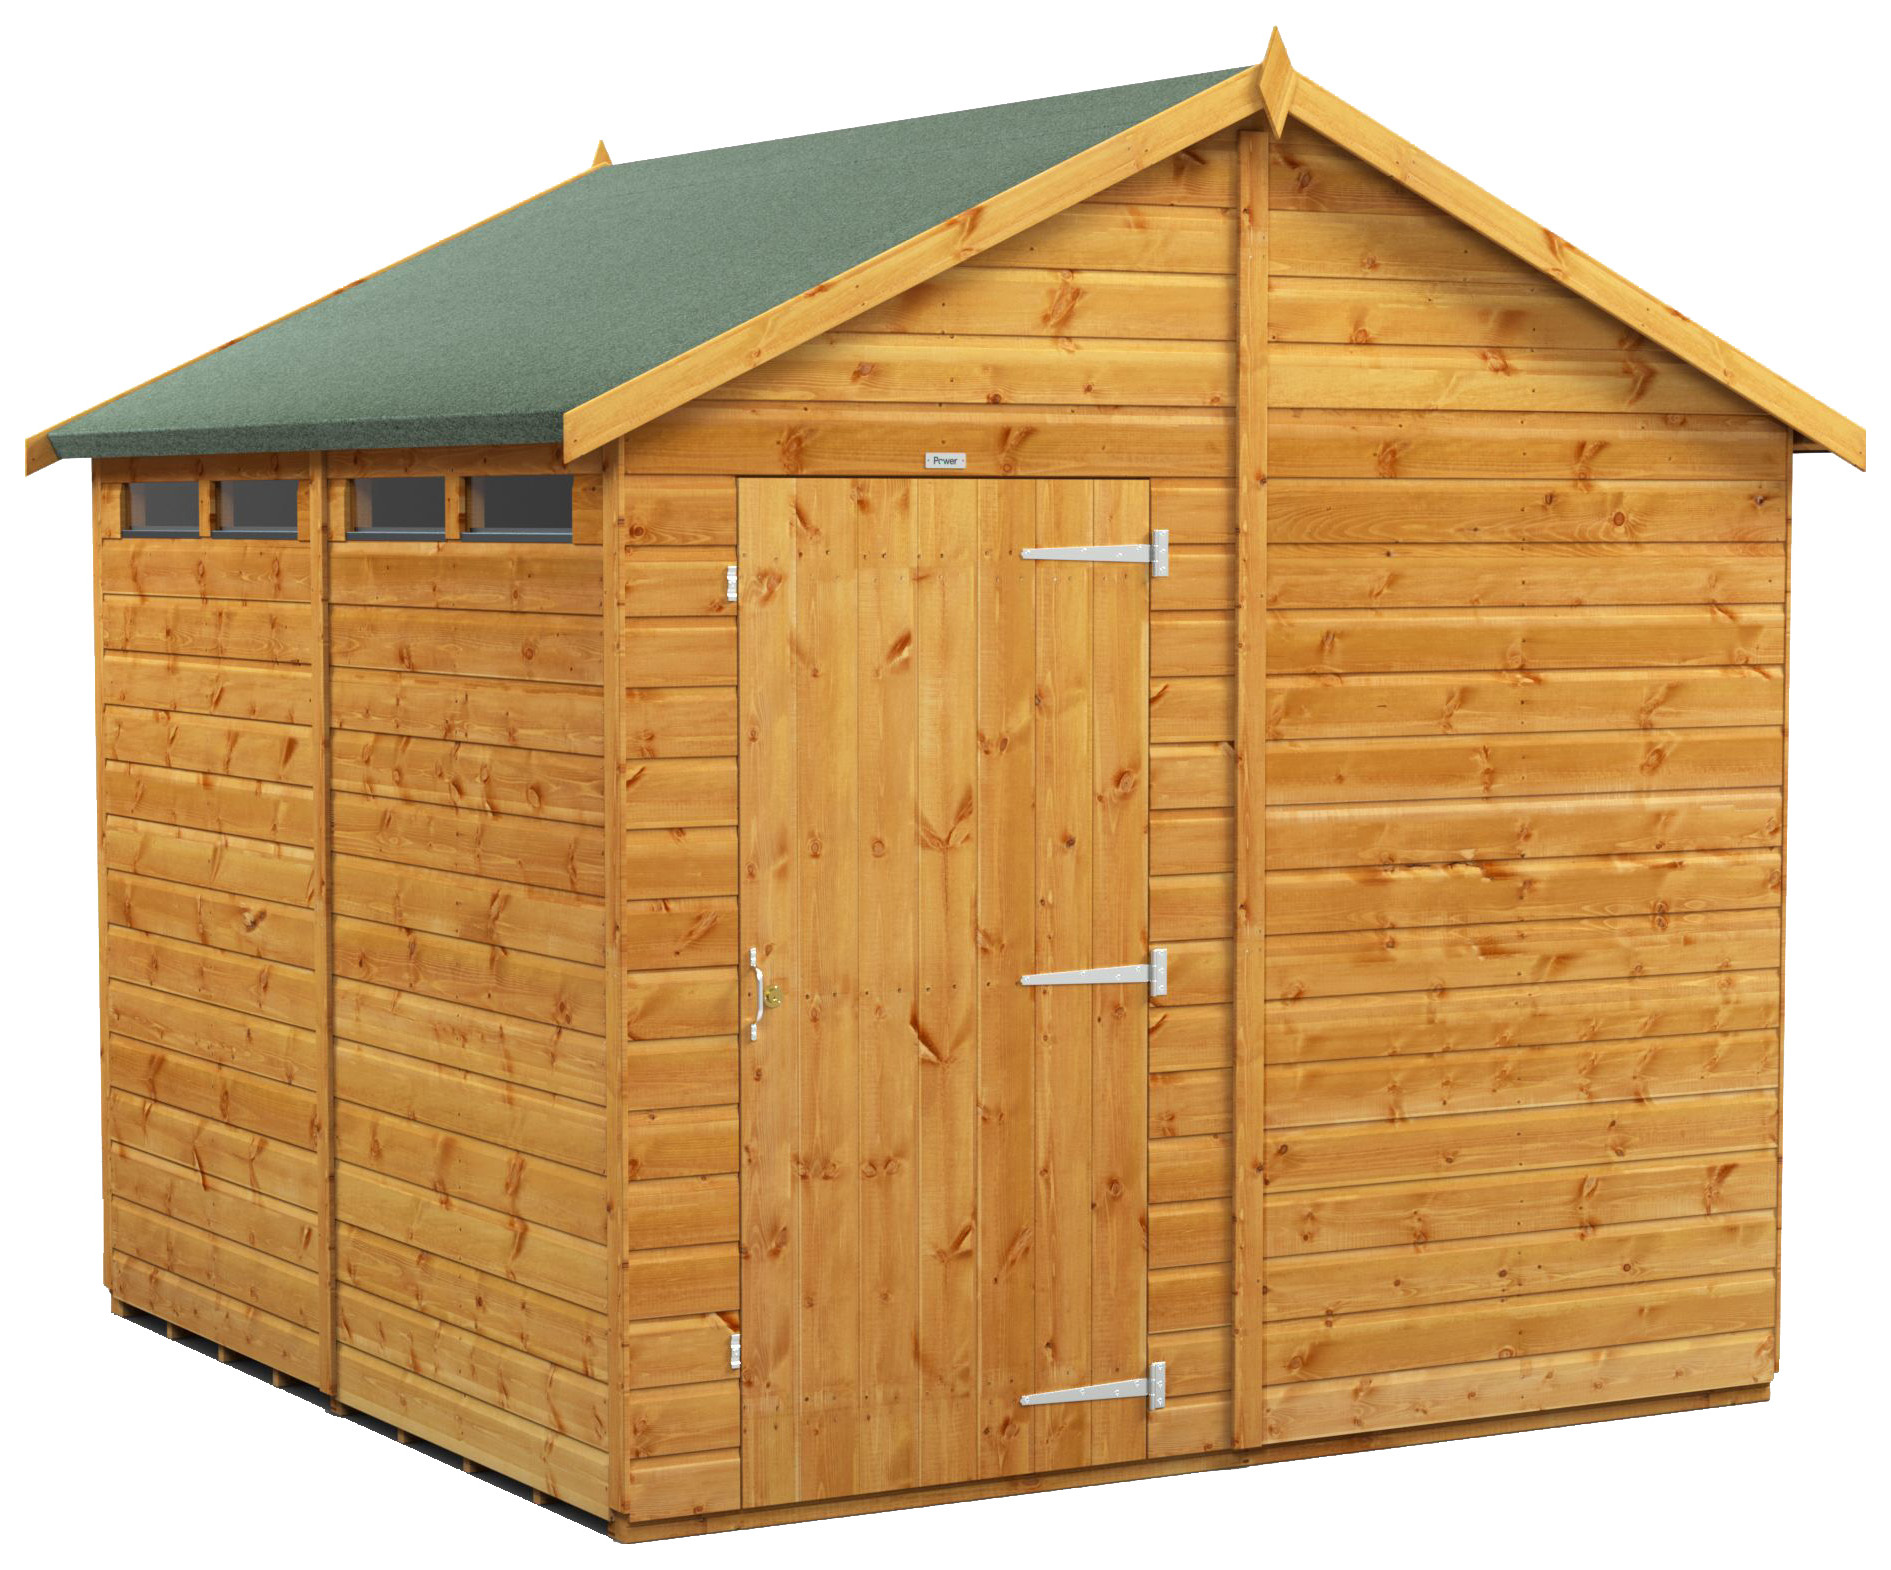 Power Sheds 8 x 8ft Apex Shiplap Dip Treated Security Shed